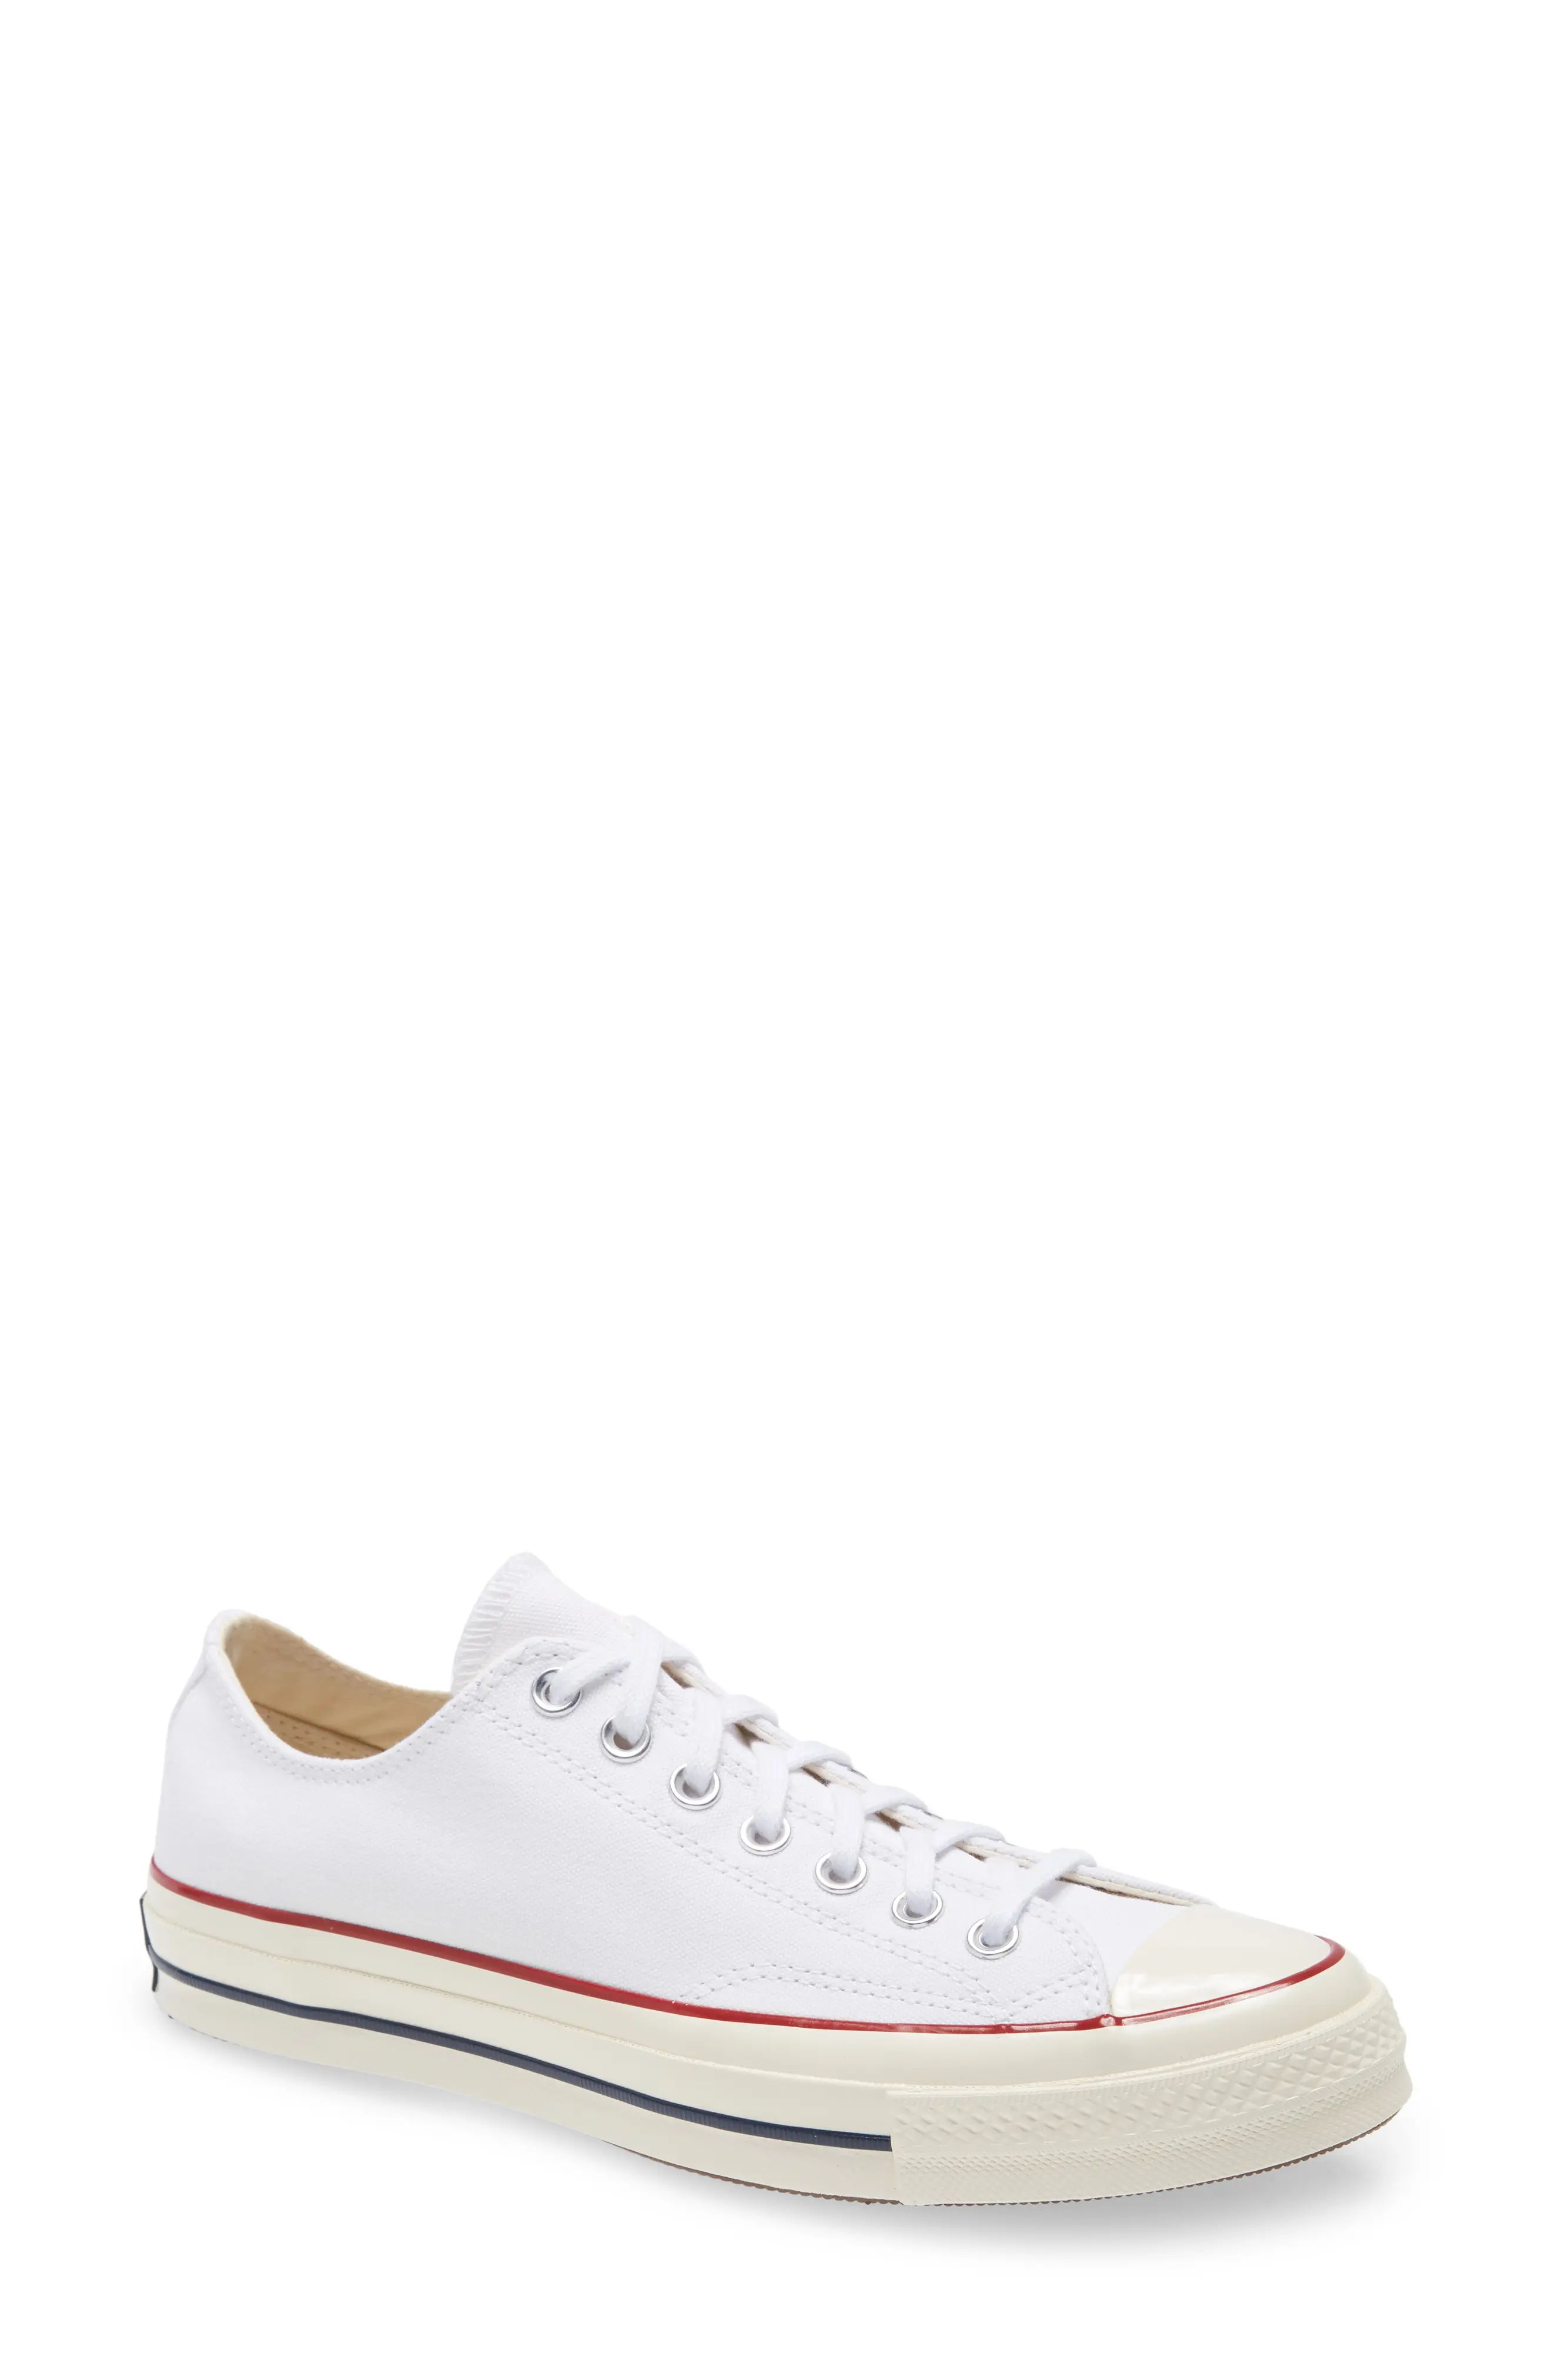 Converse Chuck Taylor All Star 70 Low Top Sneaker, Size 10.5 Women's - White | Nordstrom